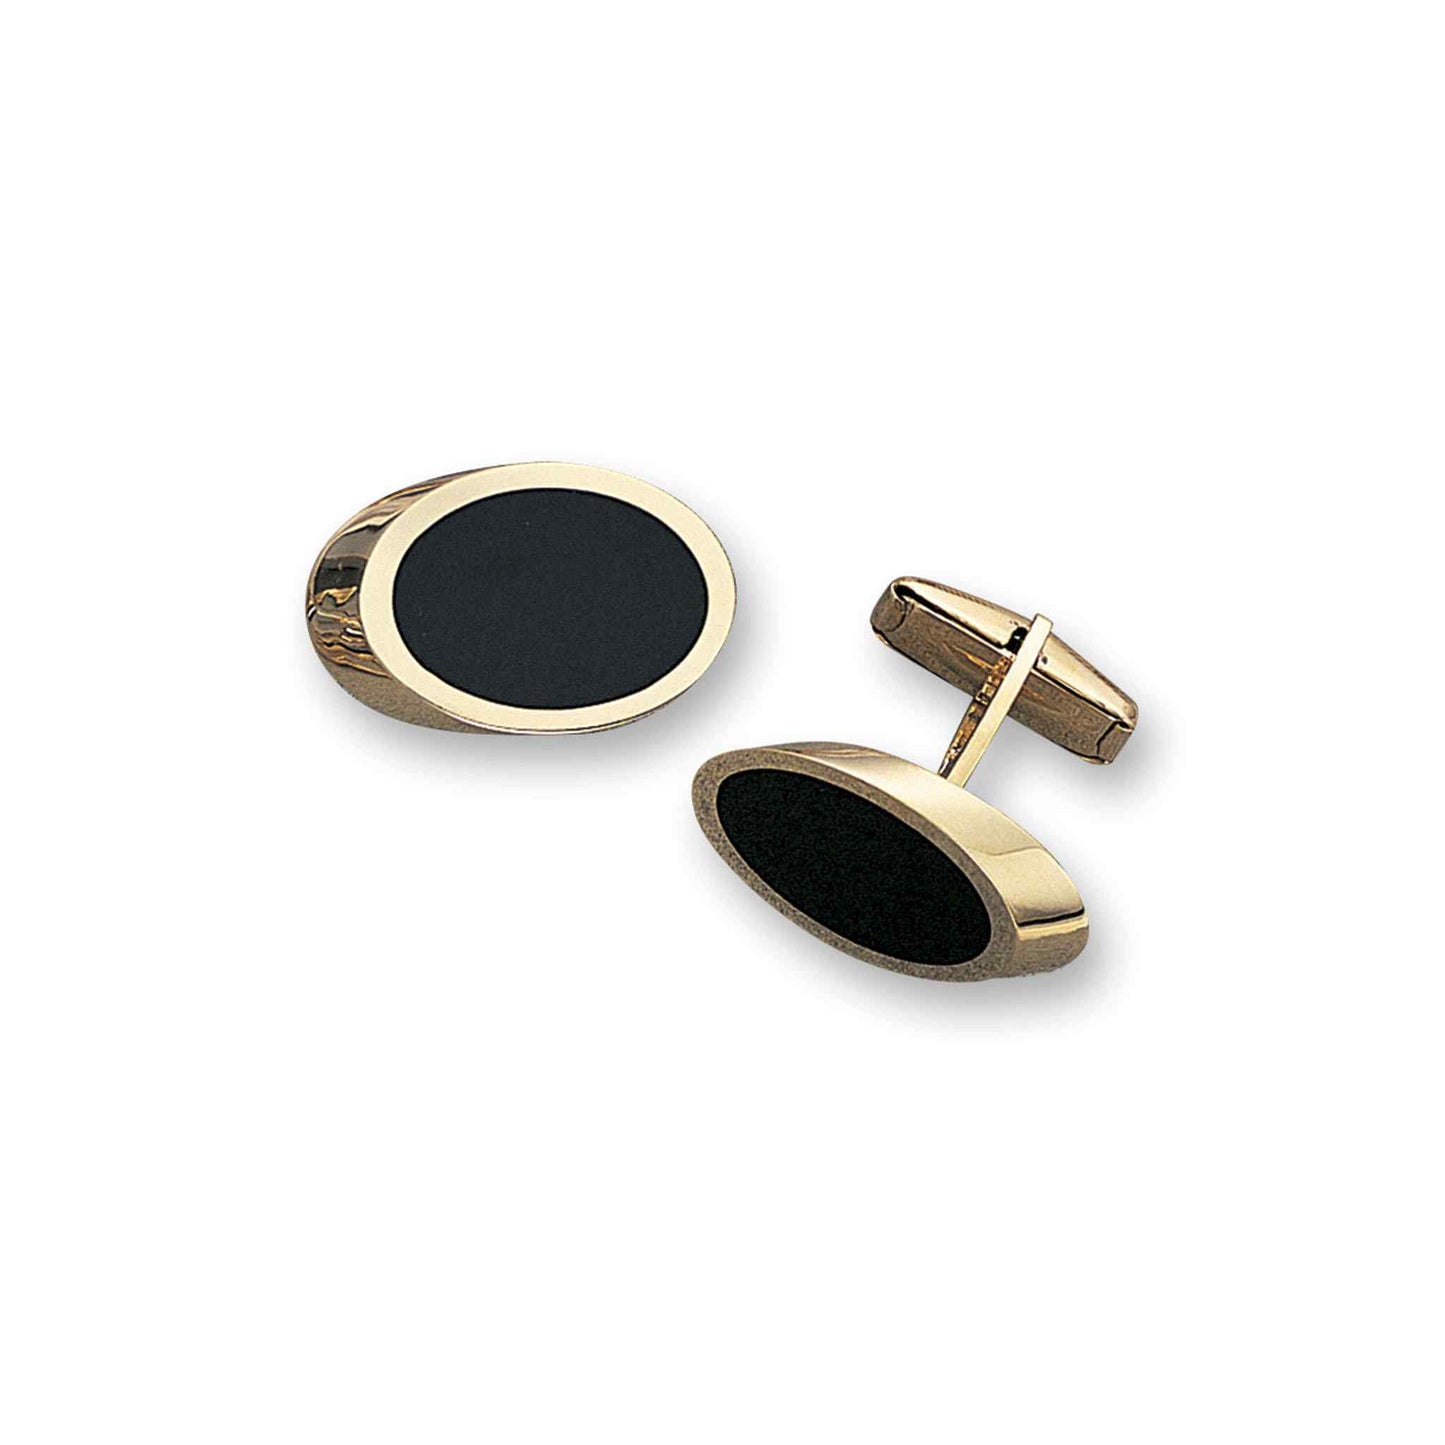 A 14k yellow gold wedge cufflinks with onyx displayed on a neutral white background.